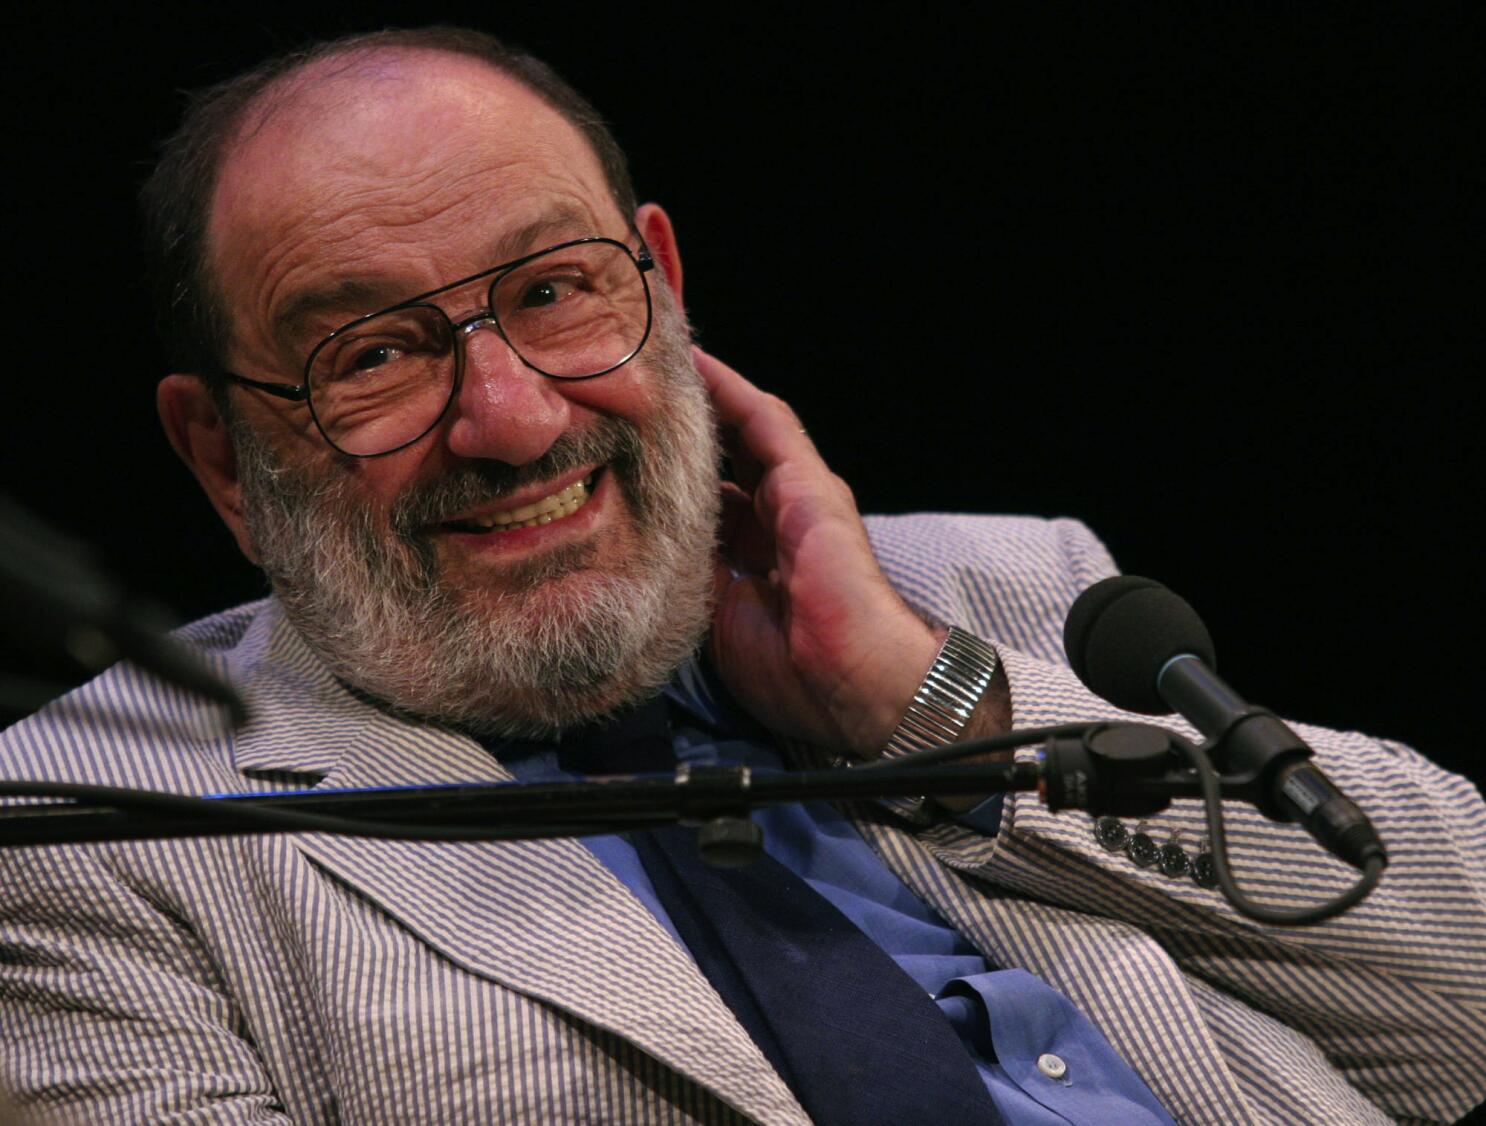 Umberto Eco, Italian author of The Name of the Rose, dies at 84